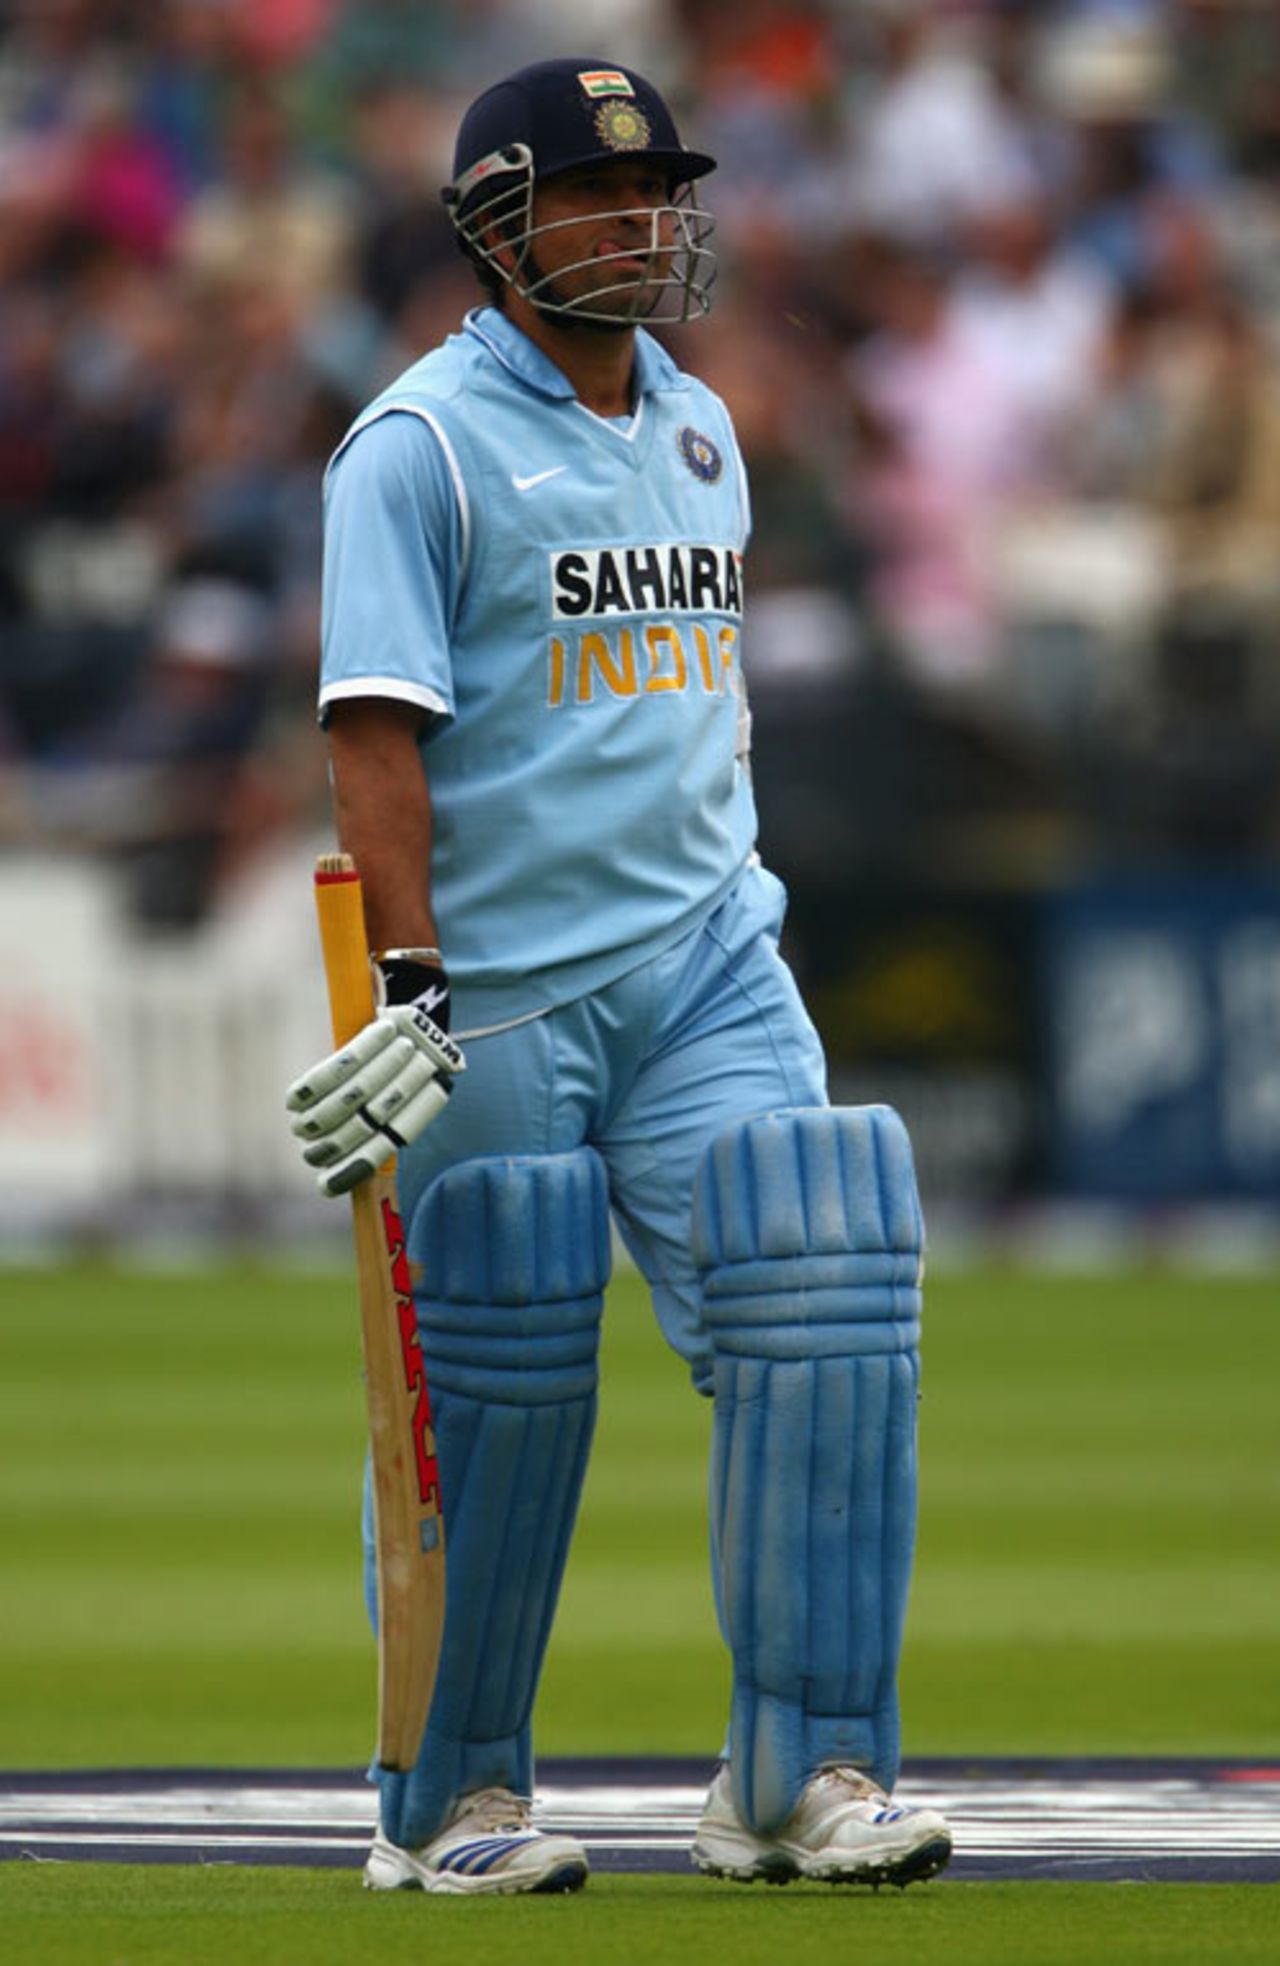 Sachin Tendulkar wasn't pleased on being adjudged out, England v India, 7th ODI, Lord's, September 8, 2007